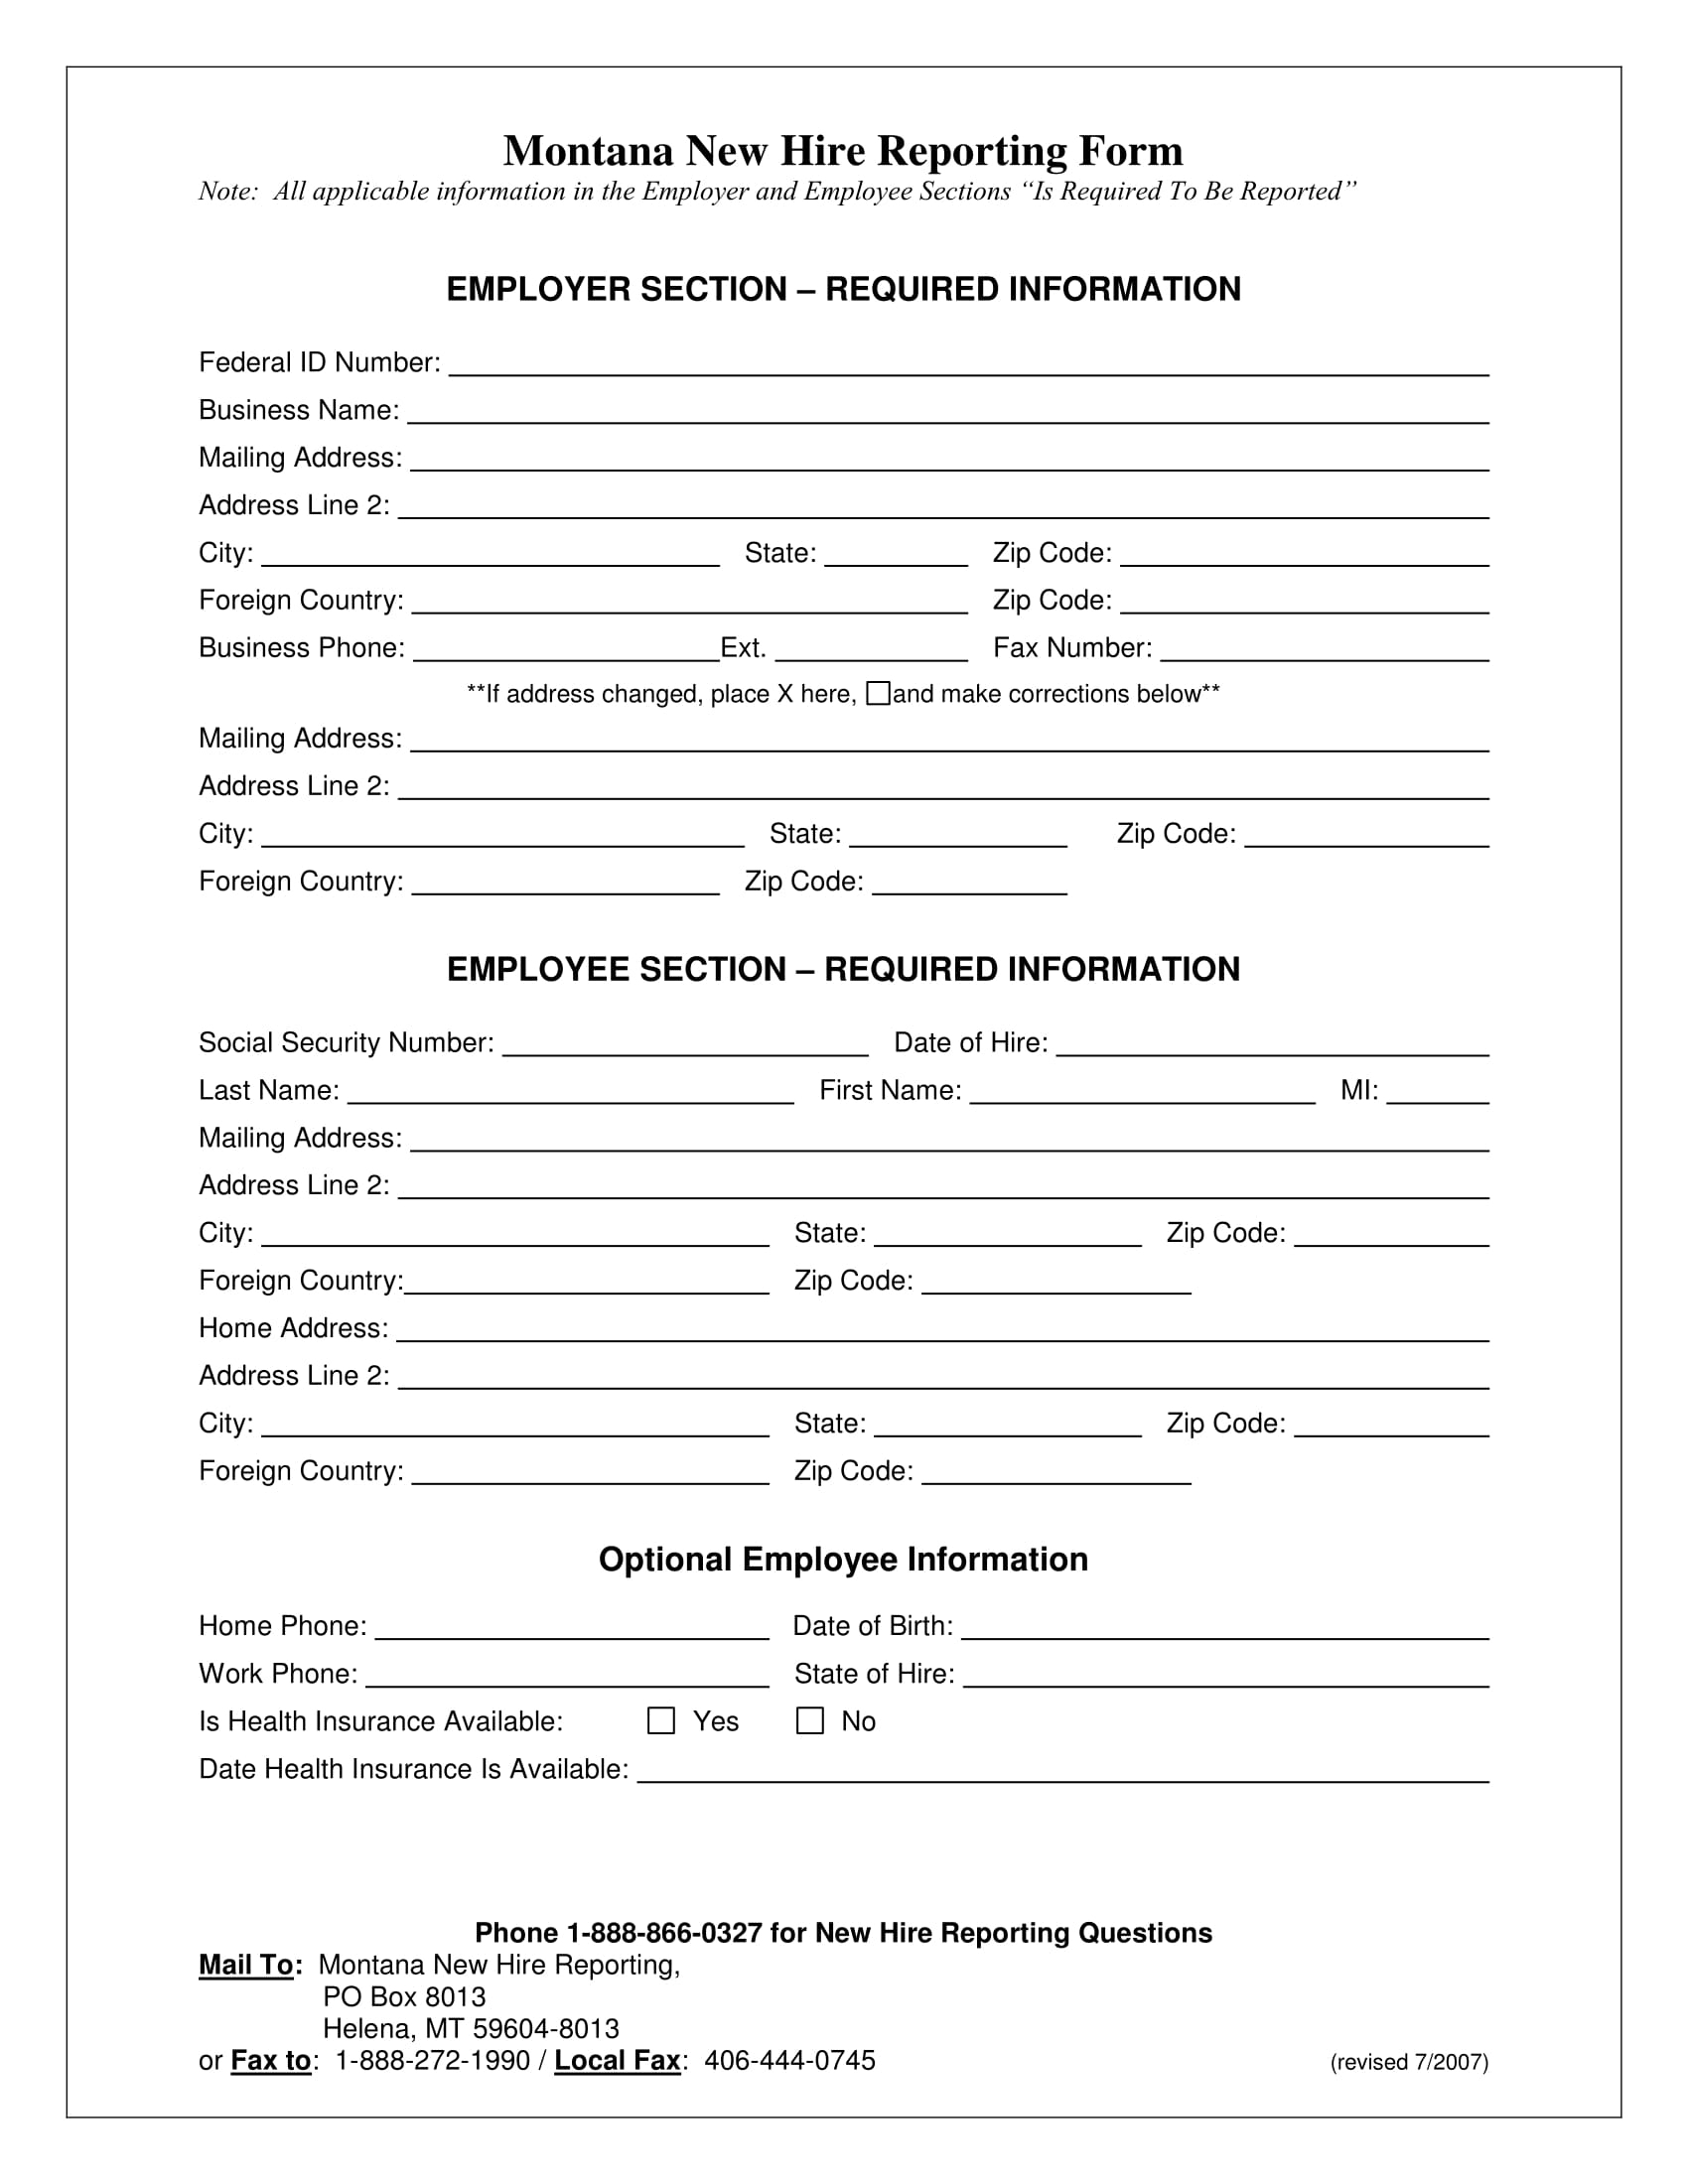 missouri-new-hire-reporting-form-newhireform